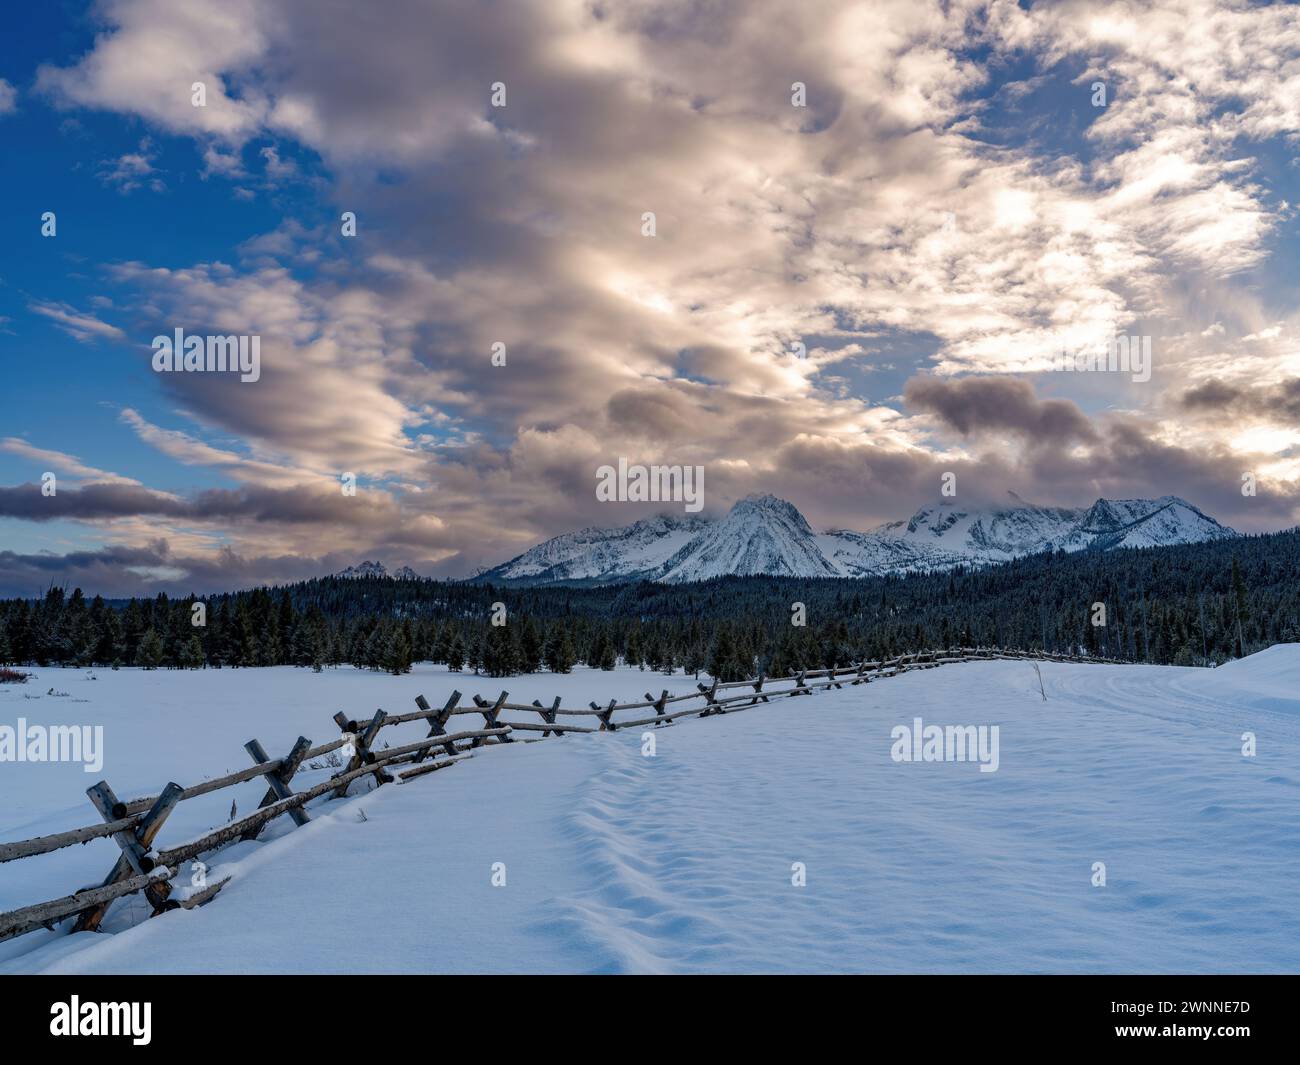 Winter snow covered scene with mountains and pole fence Stock Photo